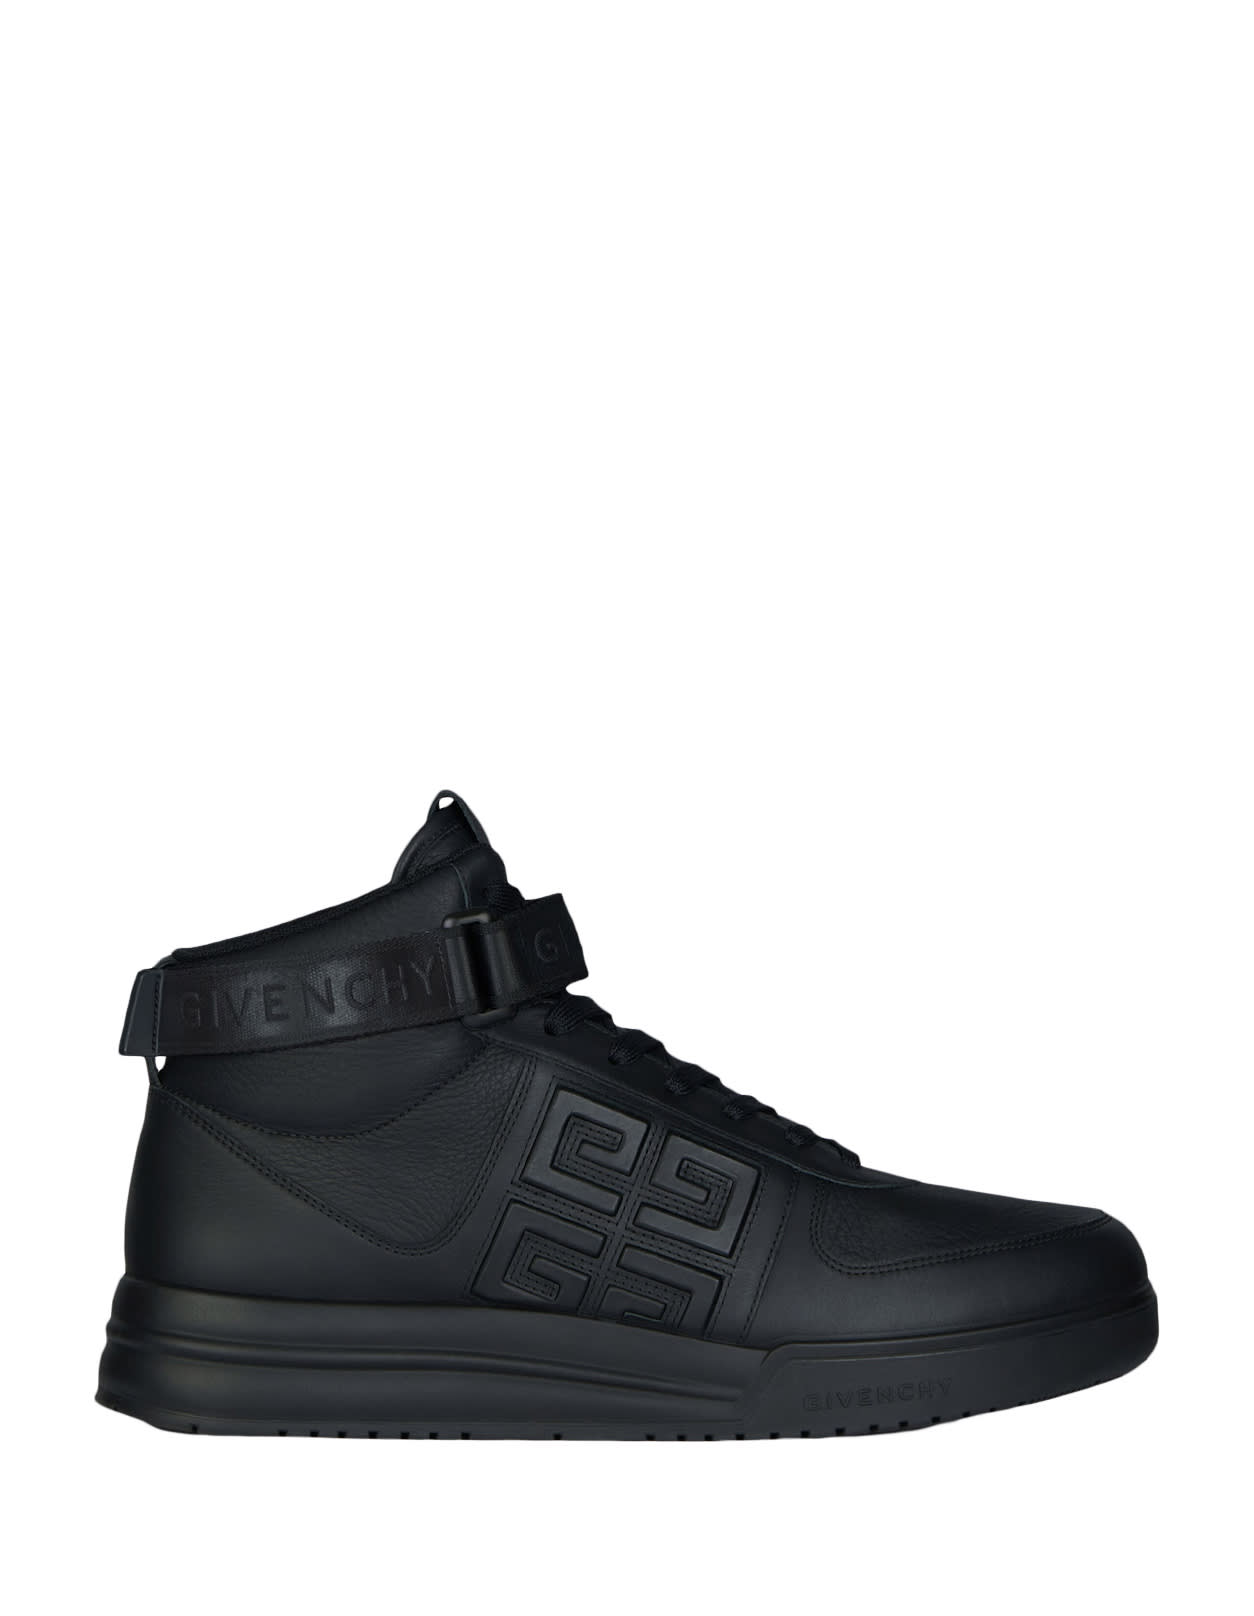 GIVENCHY G4 HIGH SNEAKERS IN BLACK